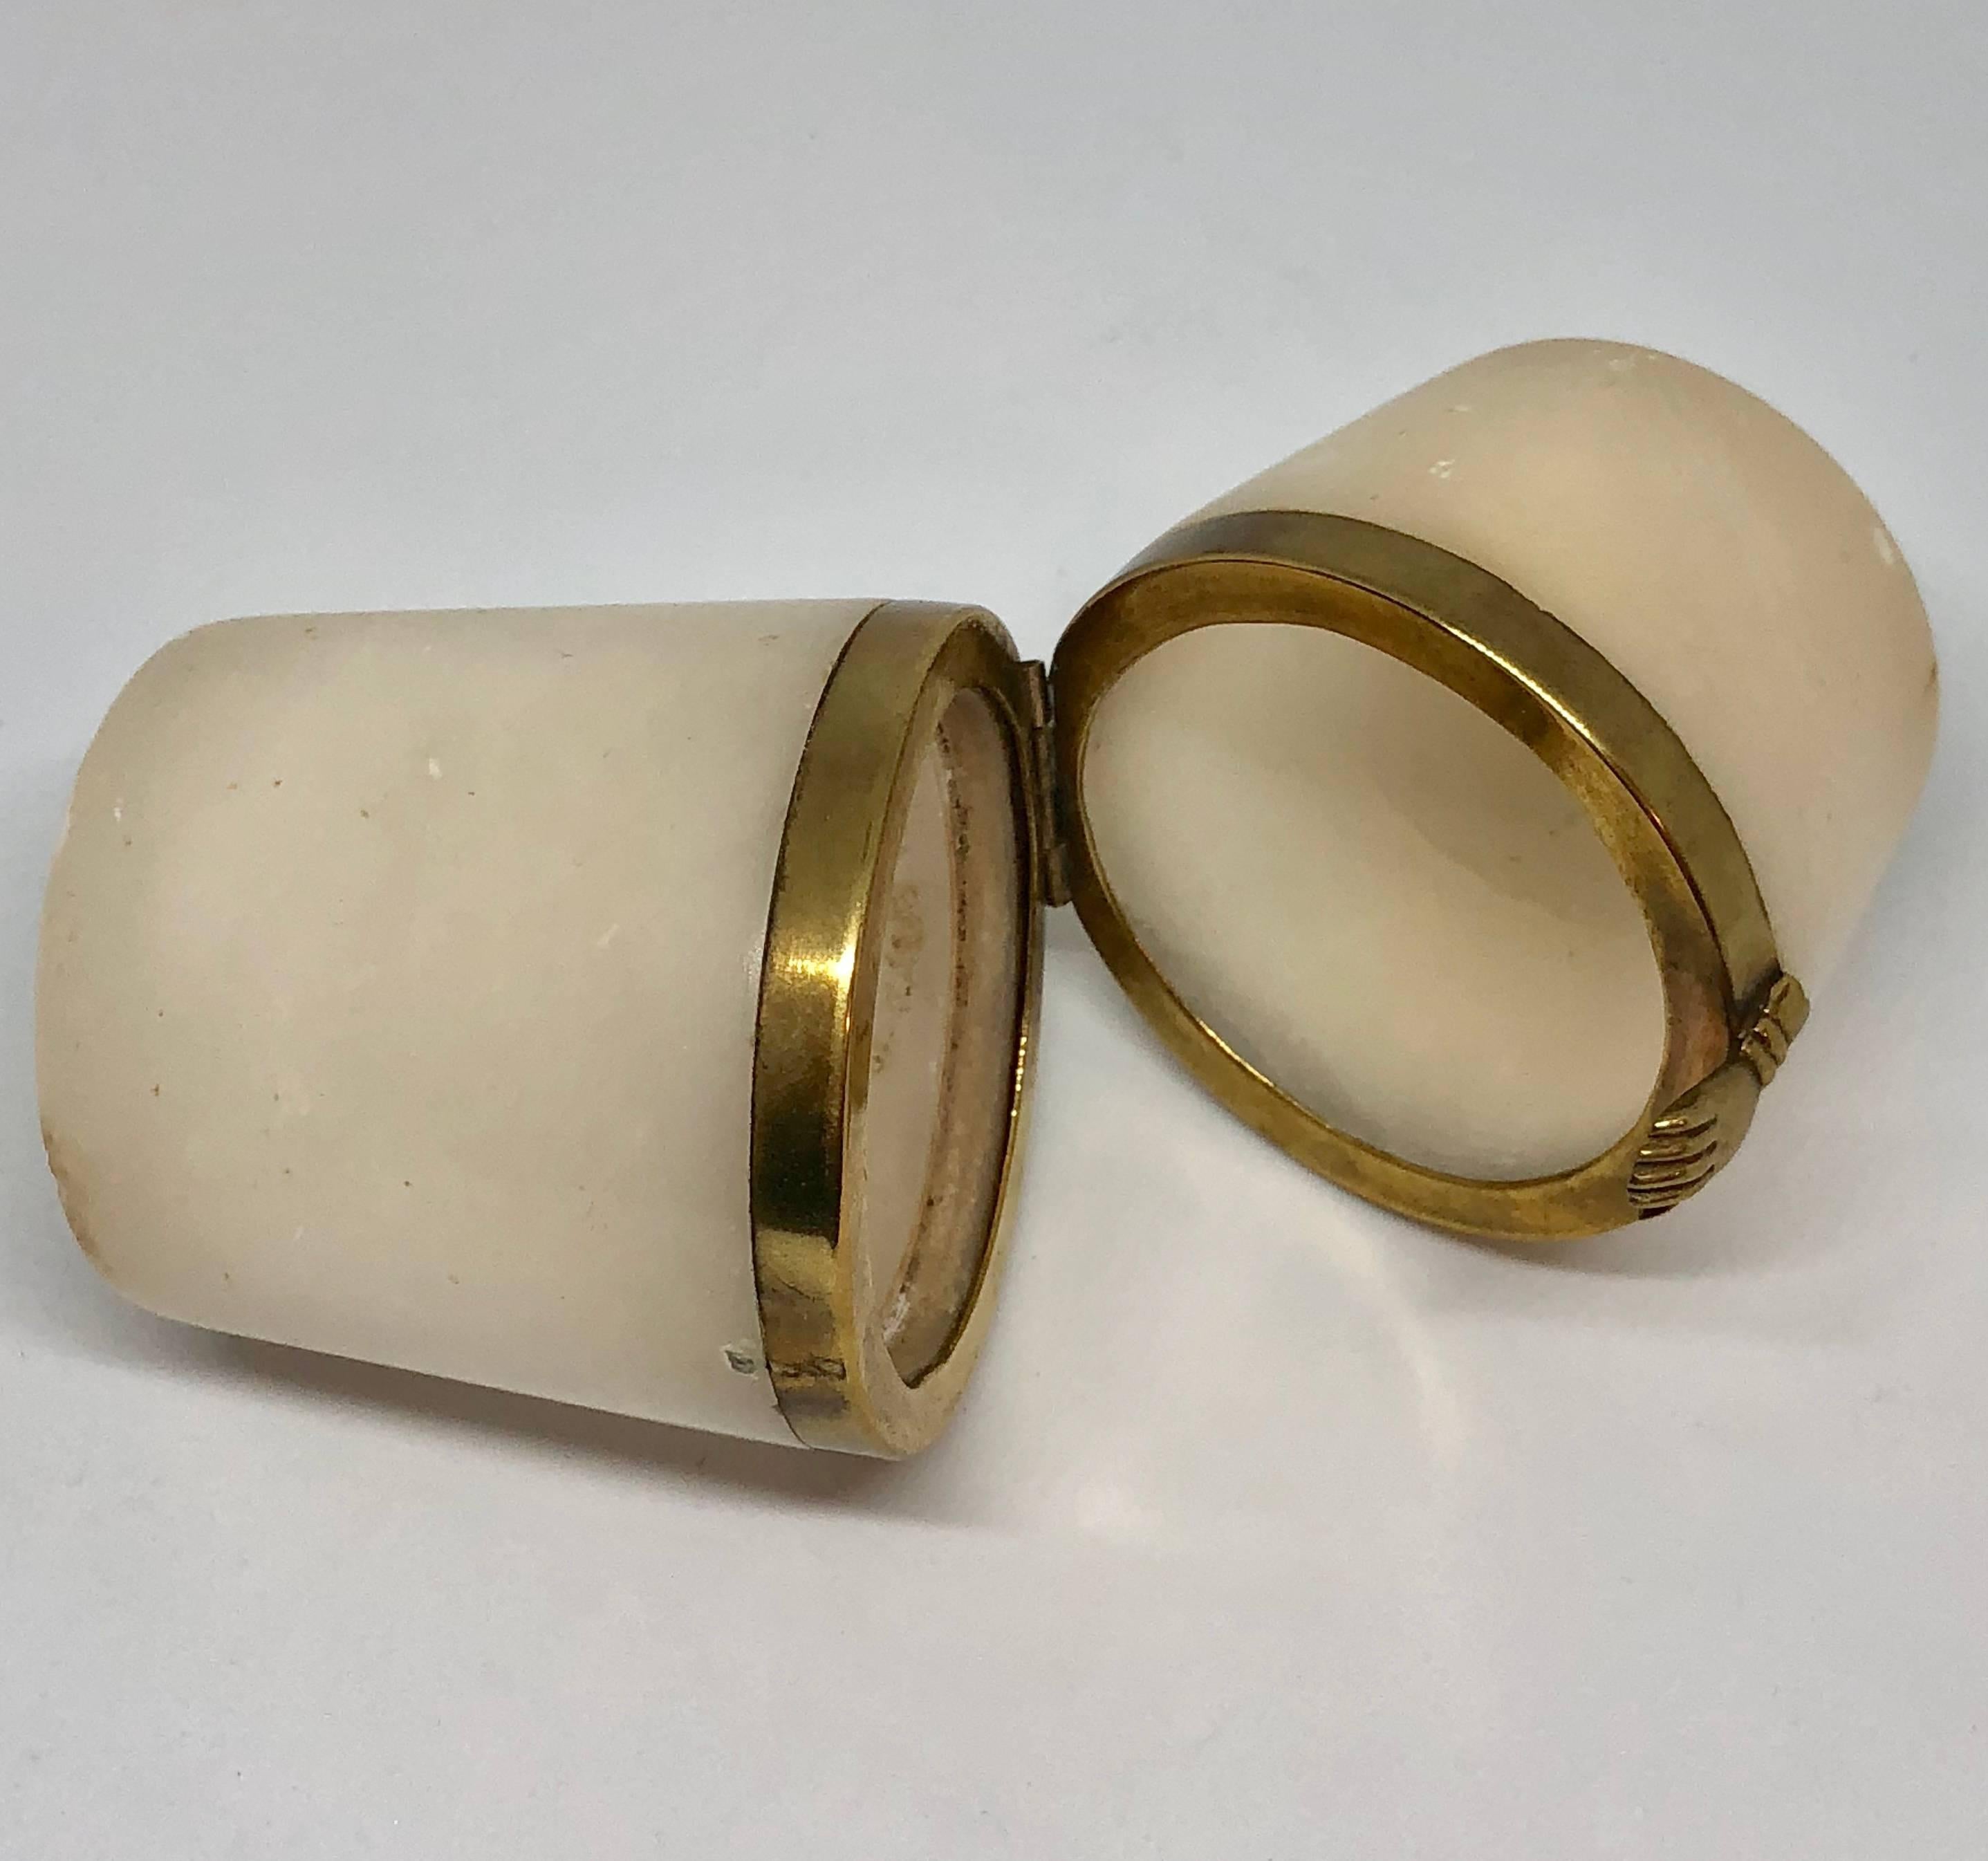 Small 18th Century Alabaster Barrel Shaped Jewelry Box W/ Brass Hands Decor For Sale 4